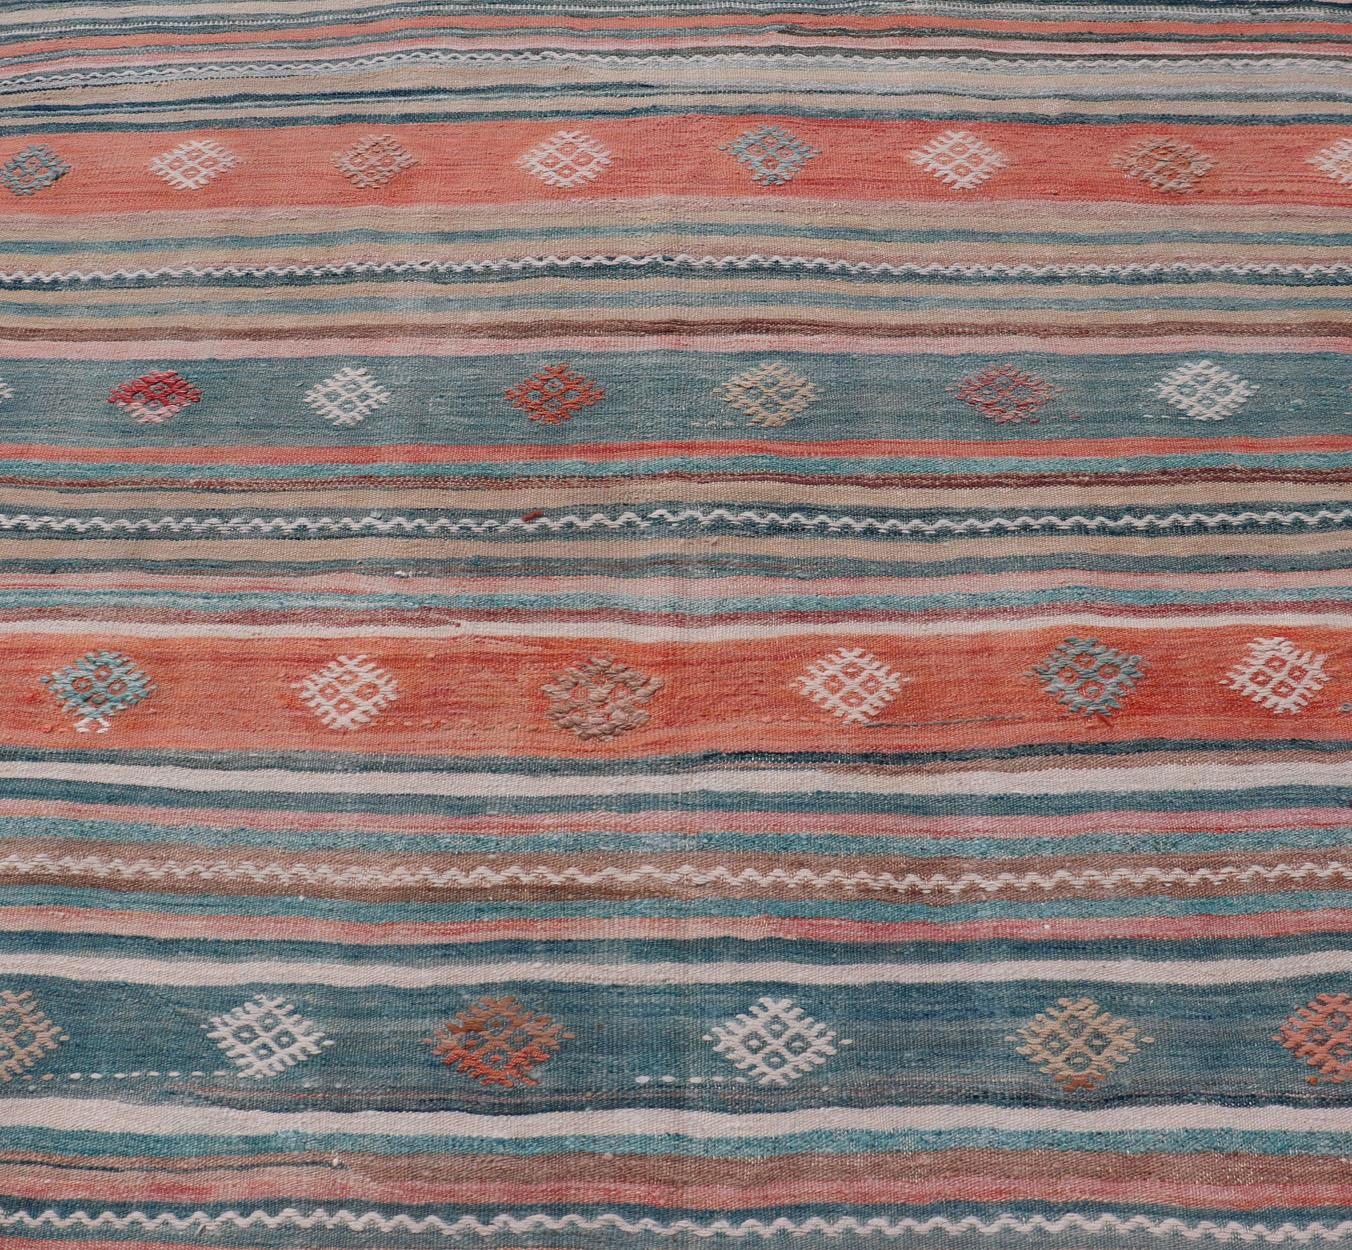 Colorful Vintage Turkish Embroidered Kilim with Stripes and Geometric Motifs. Keivan Woven Arts / rug EN-179945, country of origin / type: Turkey / Kilim, circa 1950
Measures: 5'5 x 10'4 
This vintage Turkish flat-woven Kilim features a minimalist